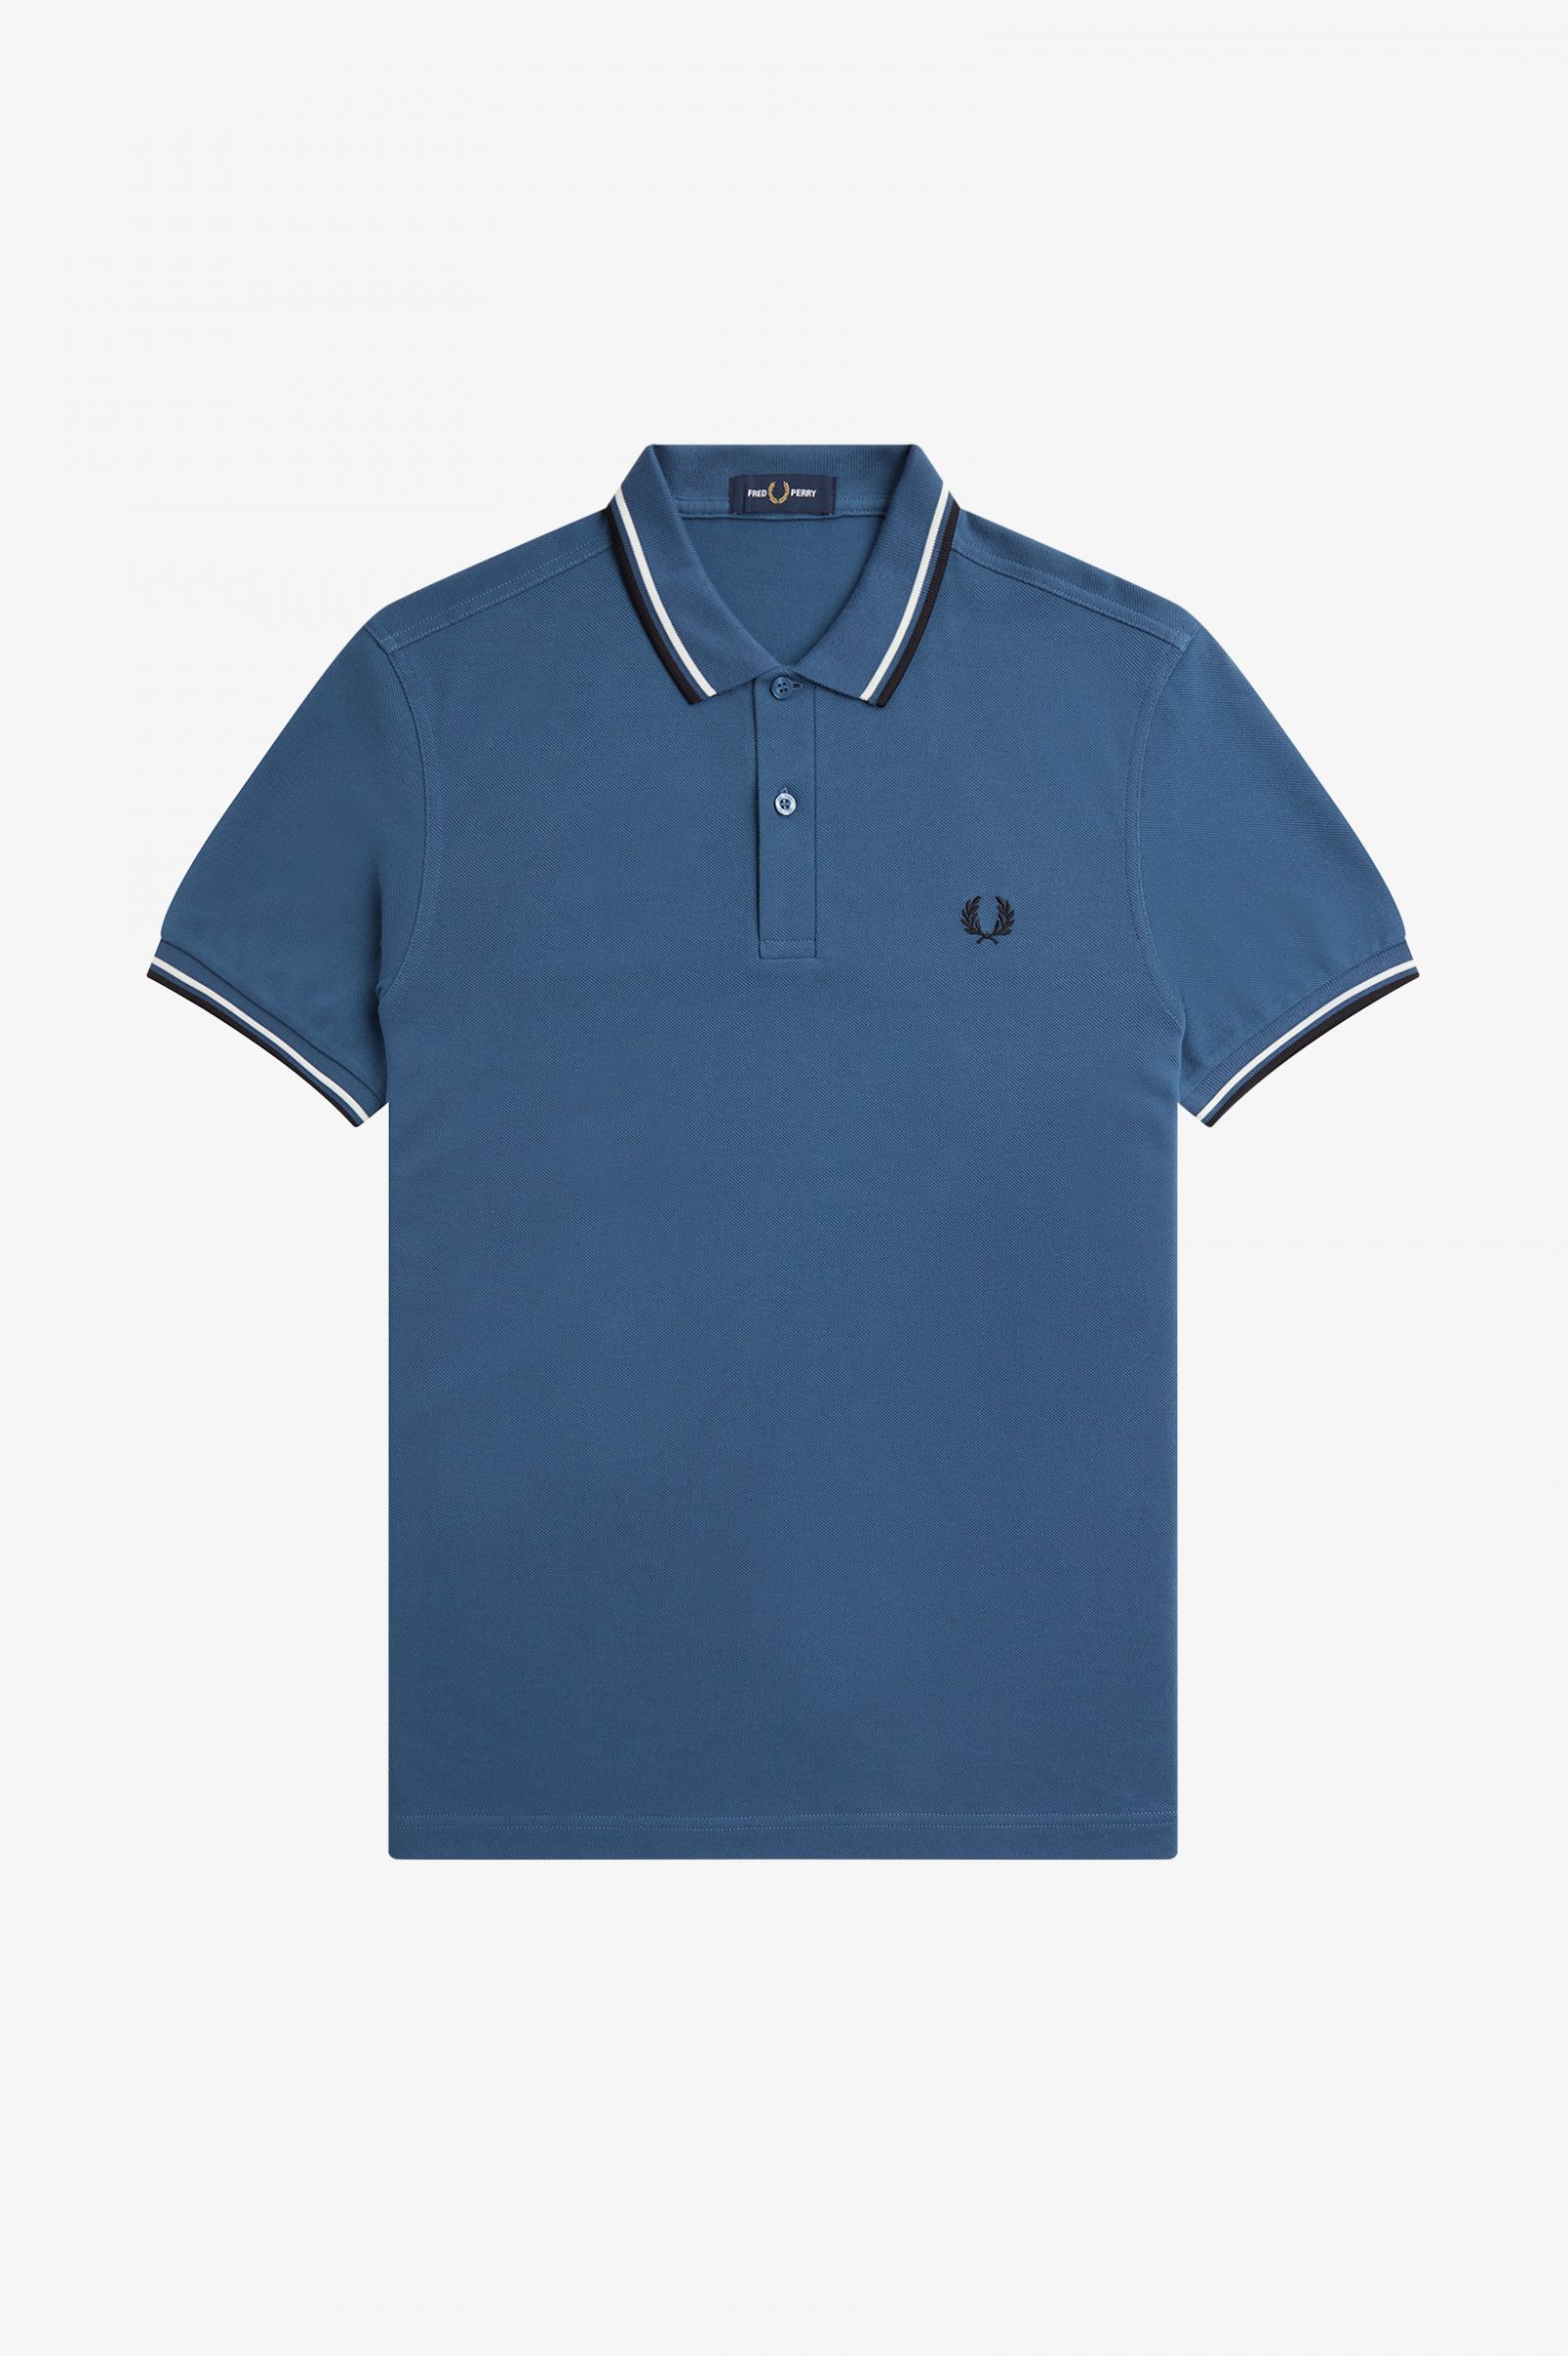 Fred Perry Twin Tipped Poloshirt in Midnightblue/Snowwhite/Black